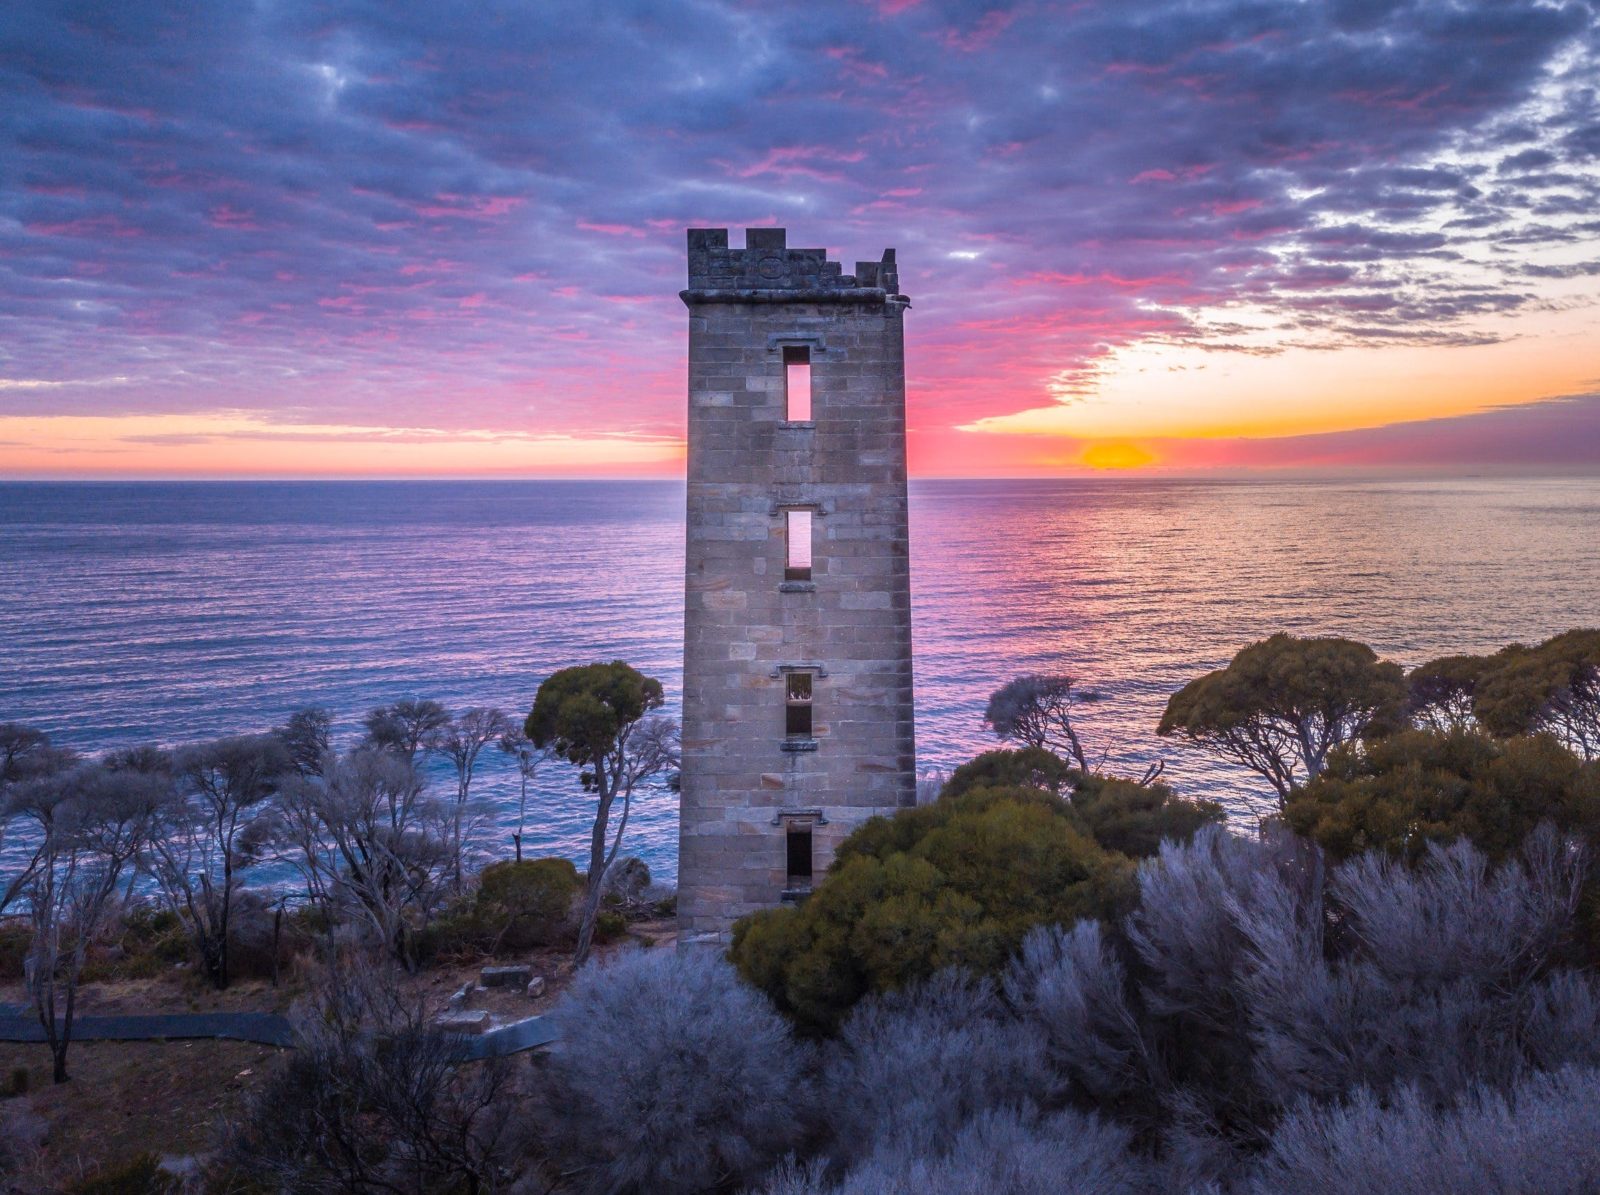 Sun rising over Boyd Tower on Red Point in the Ben Boyd National Park, Edrom